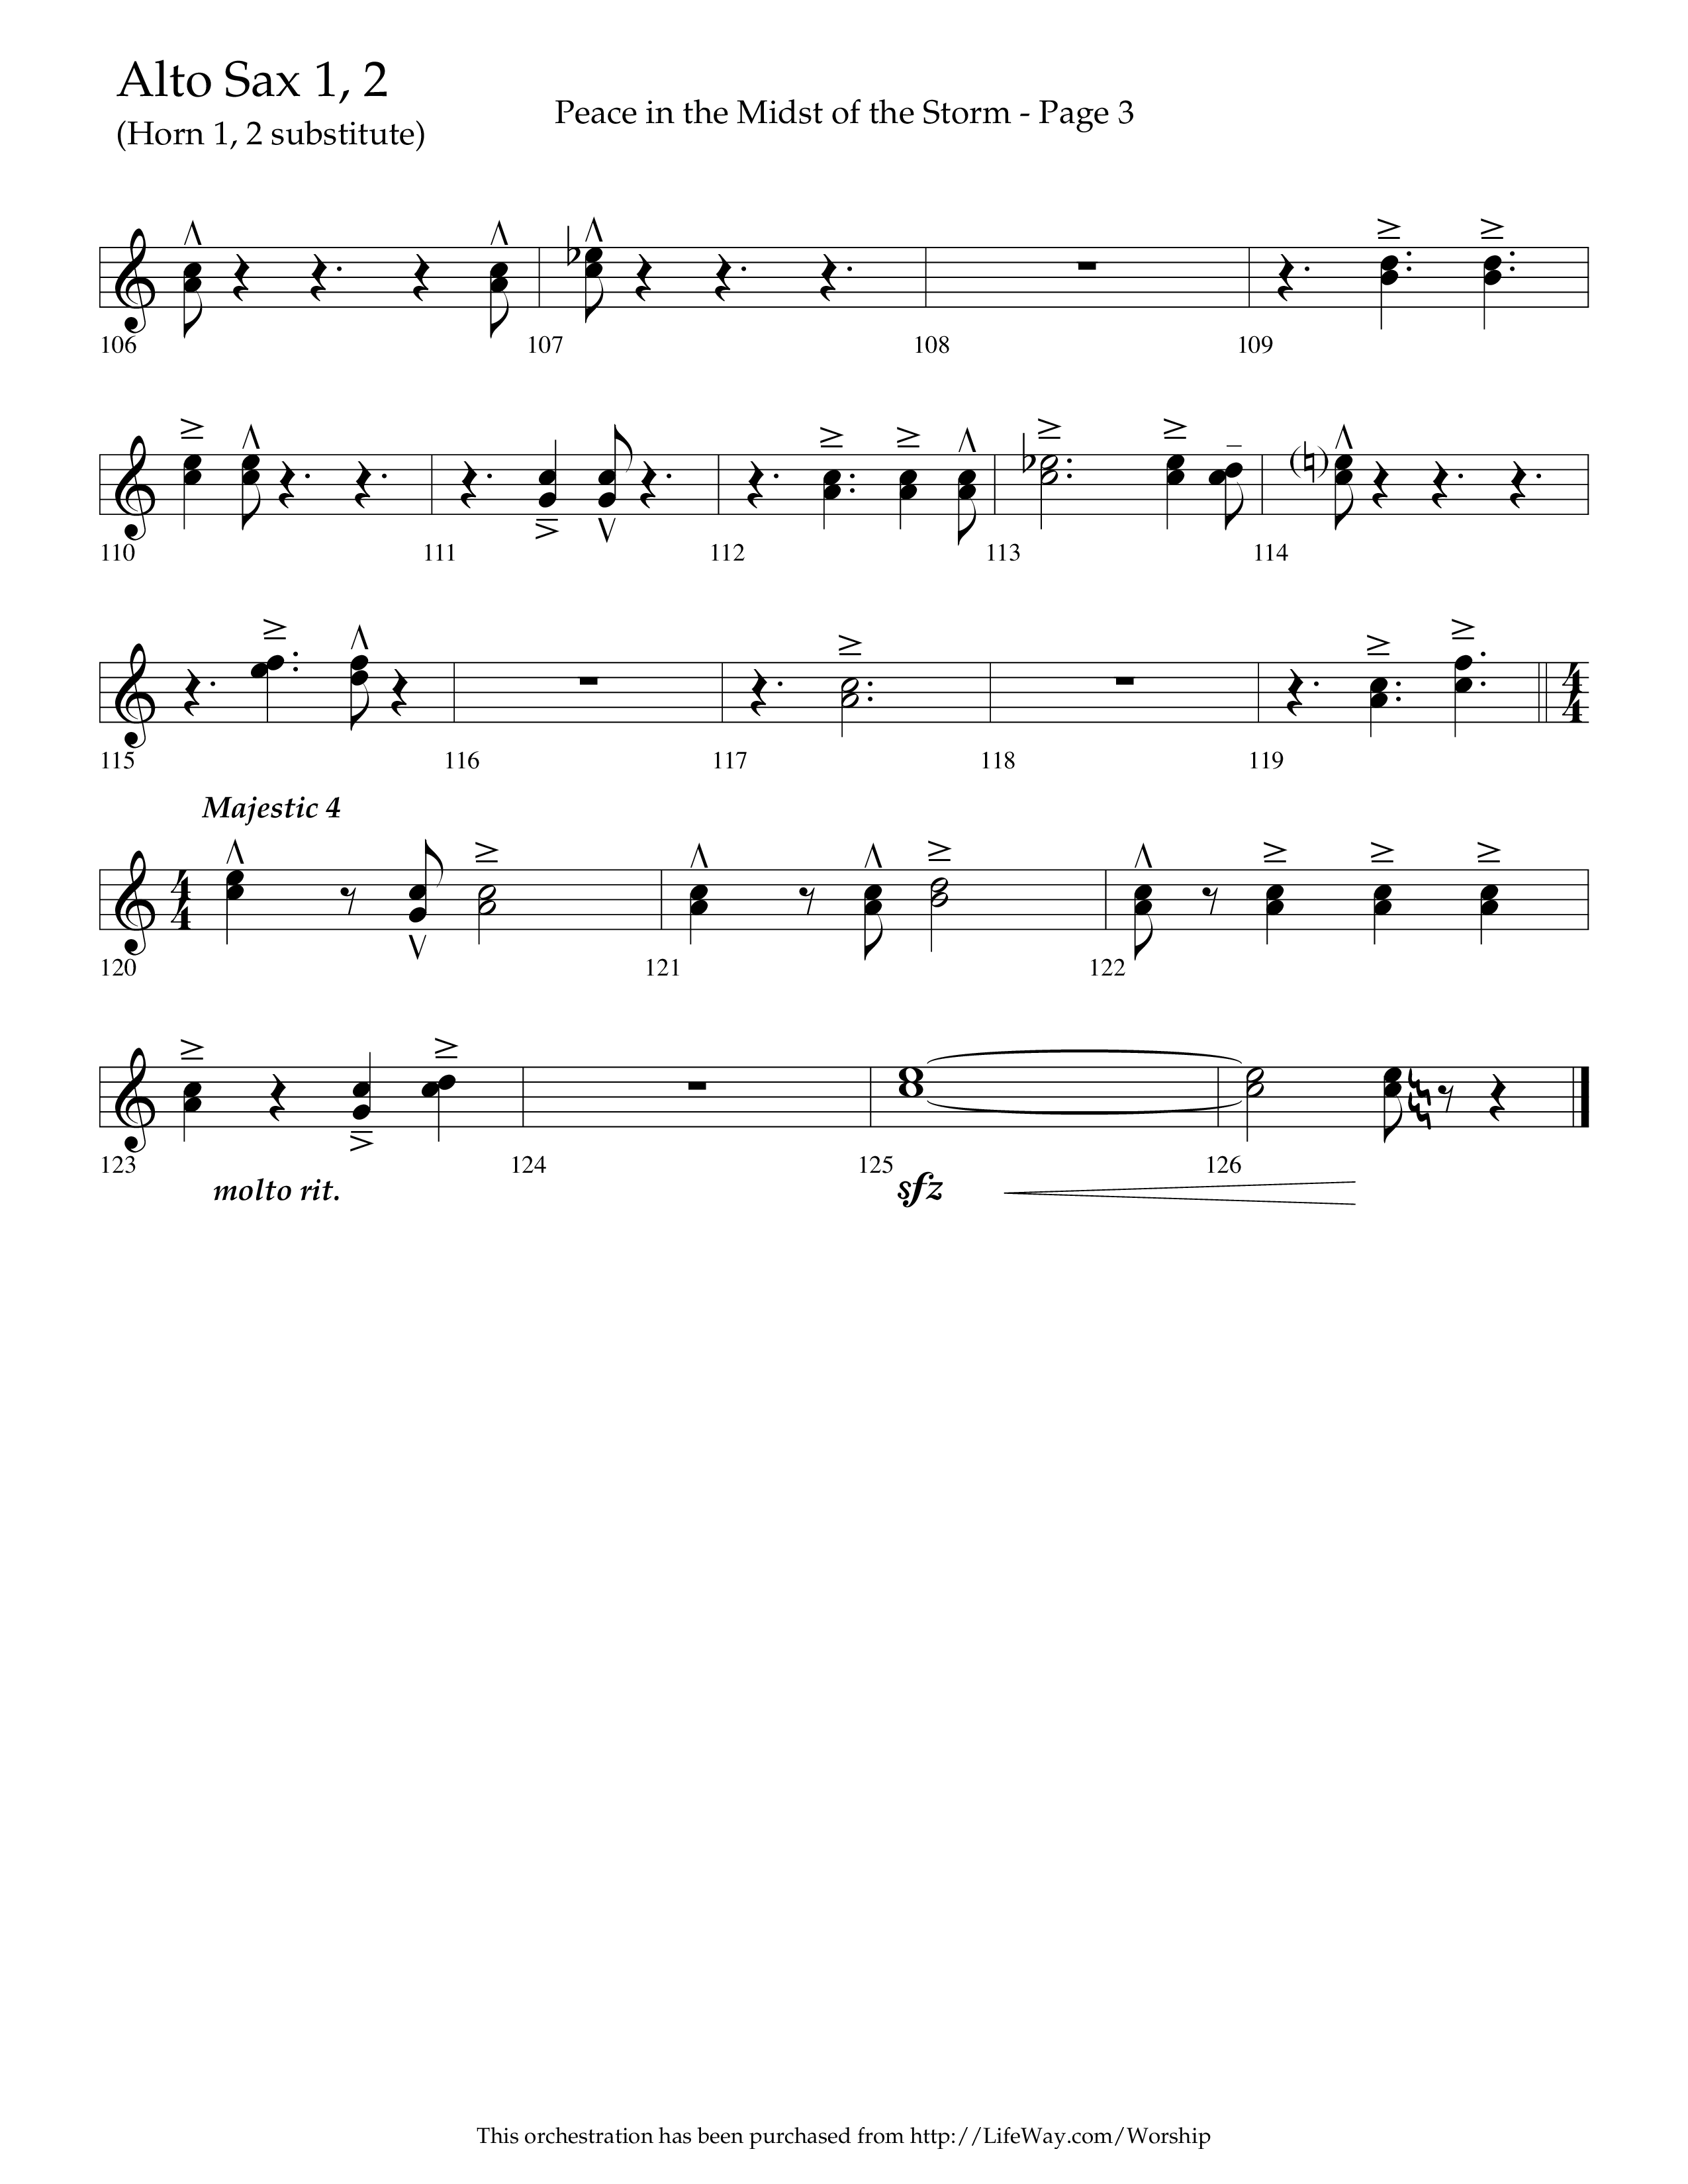 Peace In The Midst Of The Storm (Choral Anthem SATB) Alto Sax 1/2 (Lifeway Choral / Arr. David T. Clydesdale)